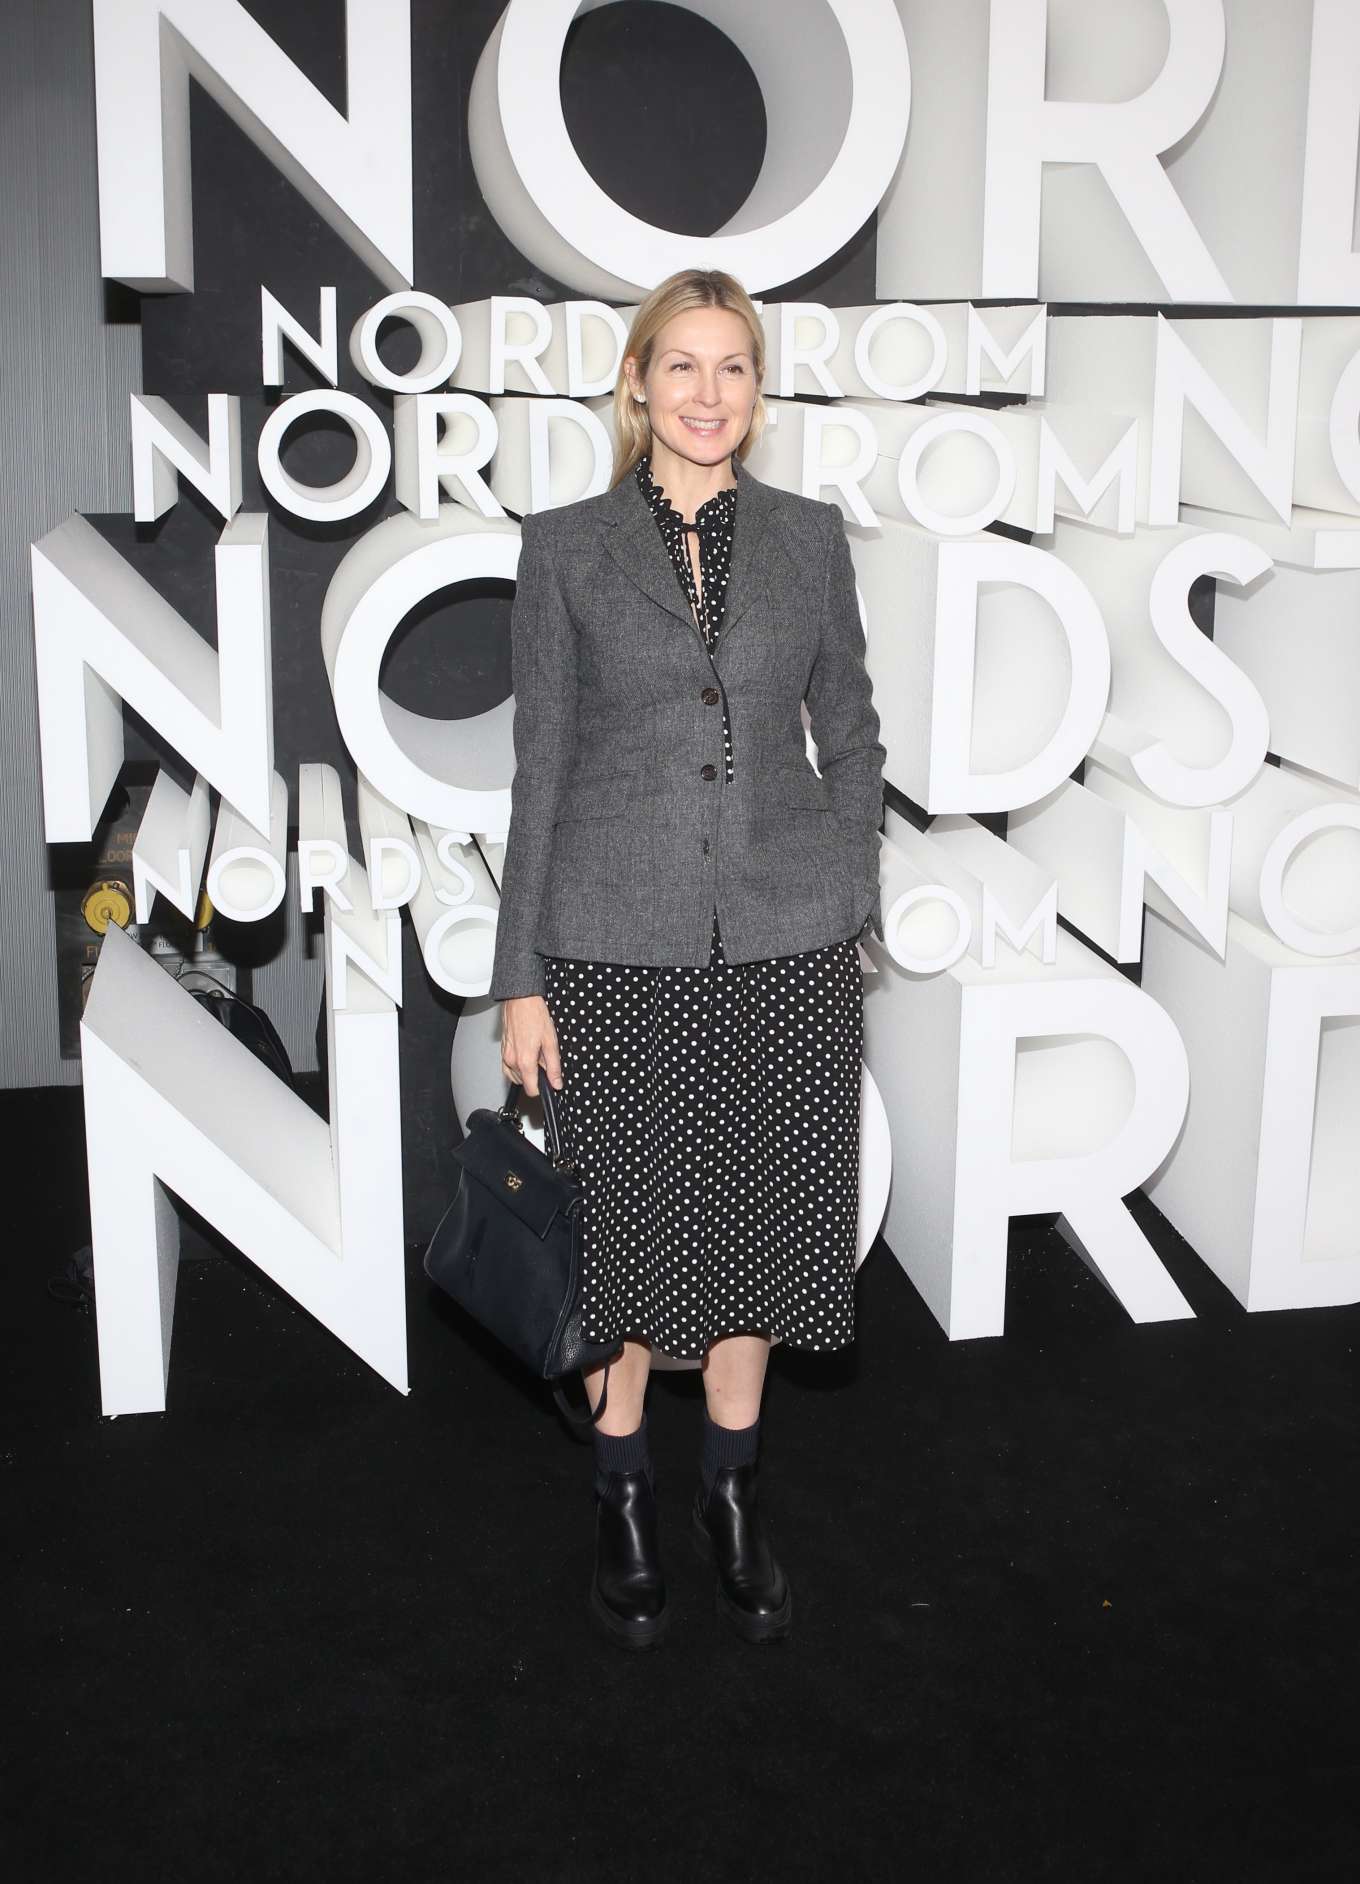 Kelly Rutherford 2019 : Kelly Rutherford – Nordstrom Grand Opening in New York City-02